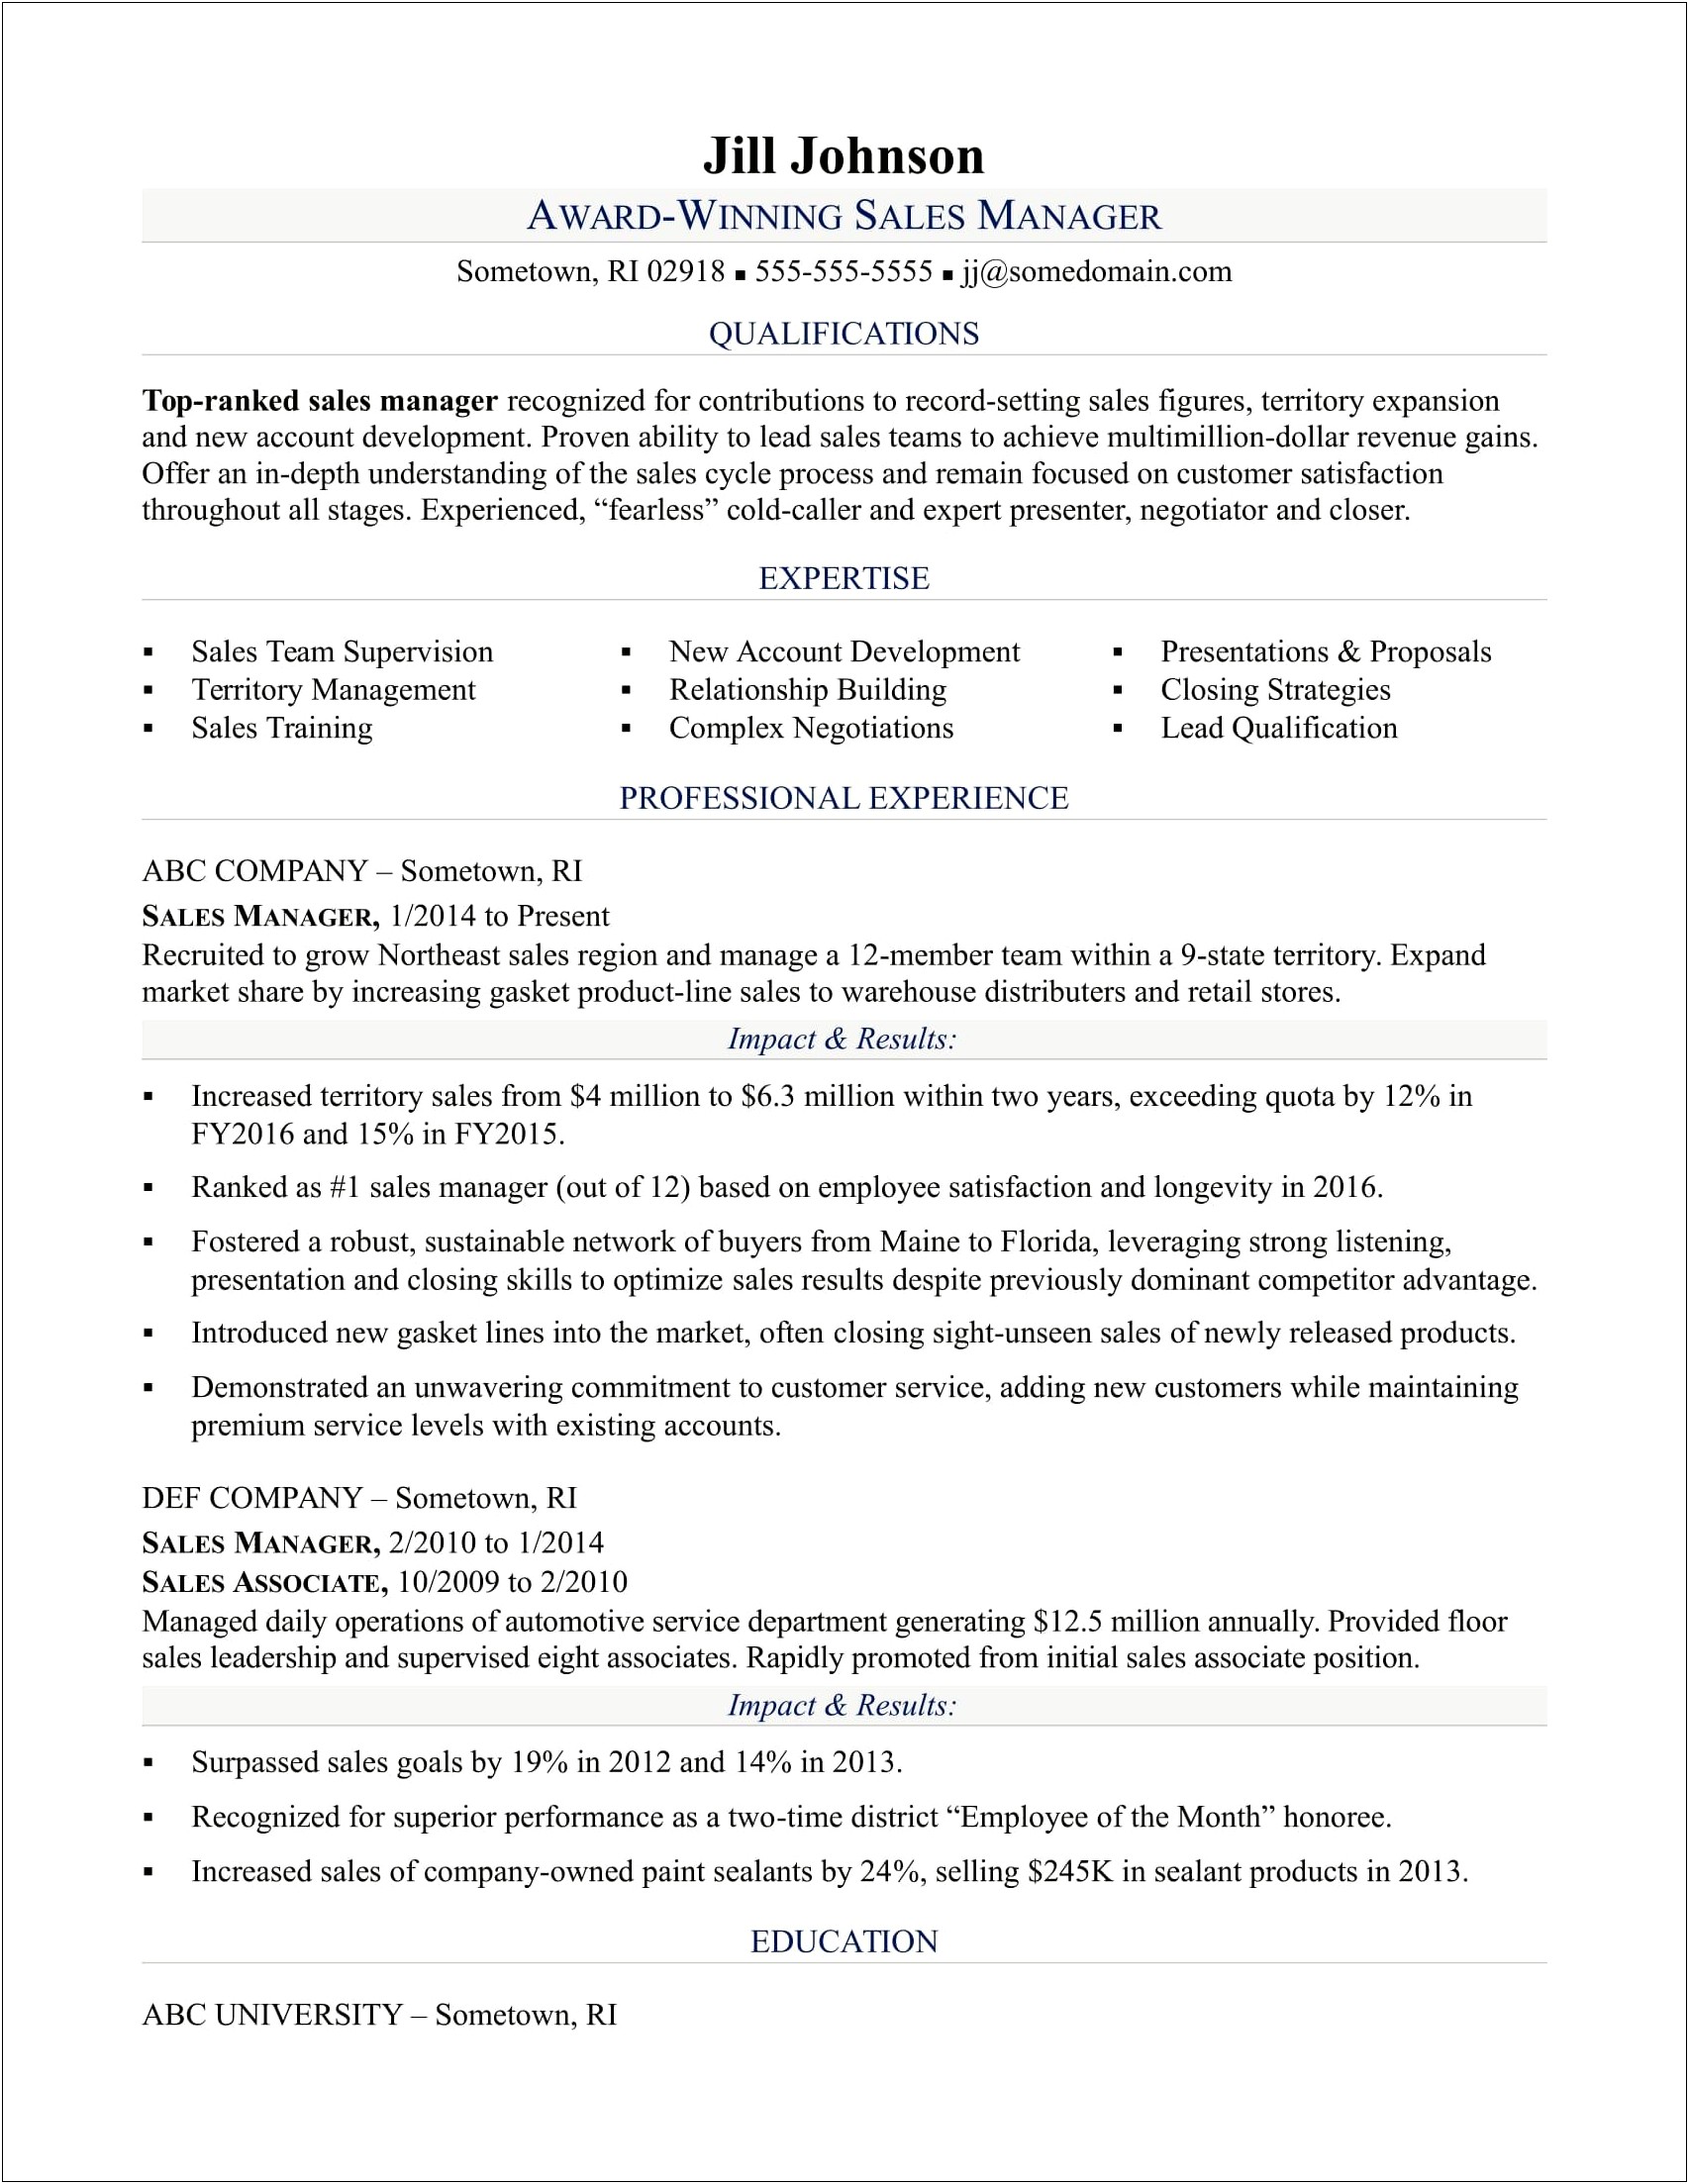 Summary Part Of Resume For Sales